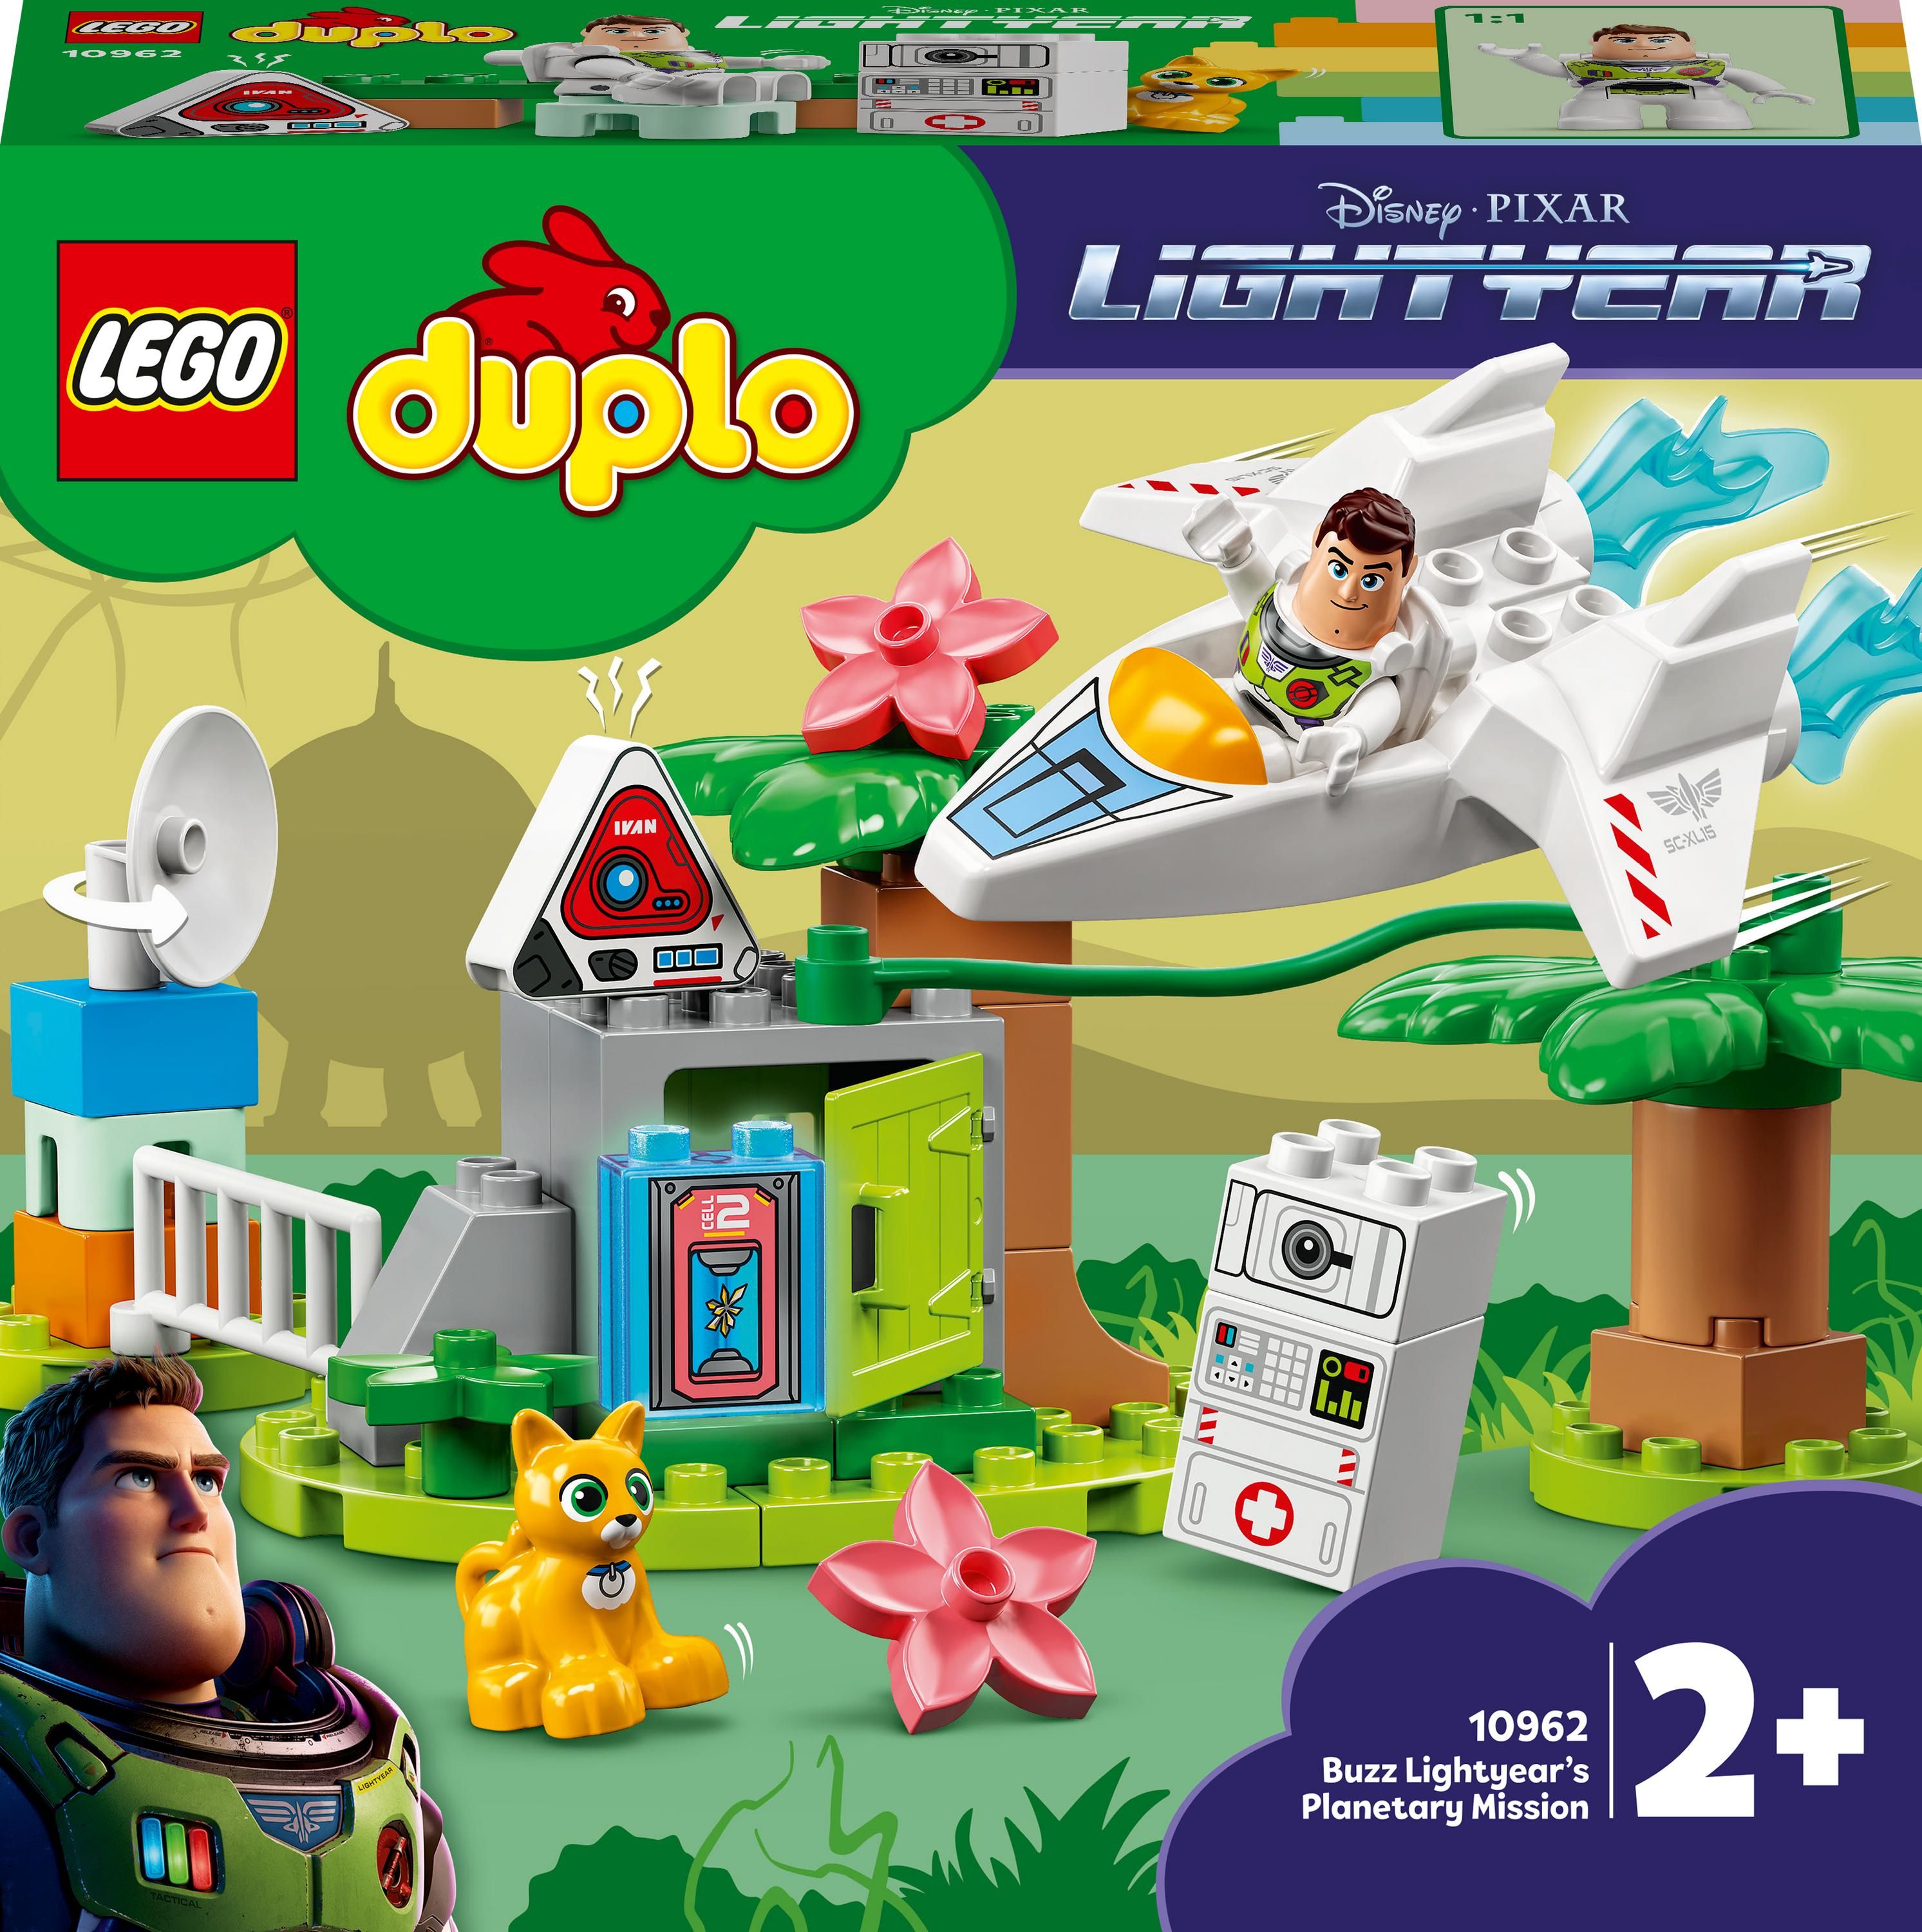 LEGO 10962 DUPLO Buzz Lightyears Planetary Mission Construction Toy (Space Toy with Spaceship and Robot) LEGO konstruktors